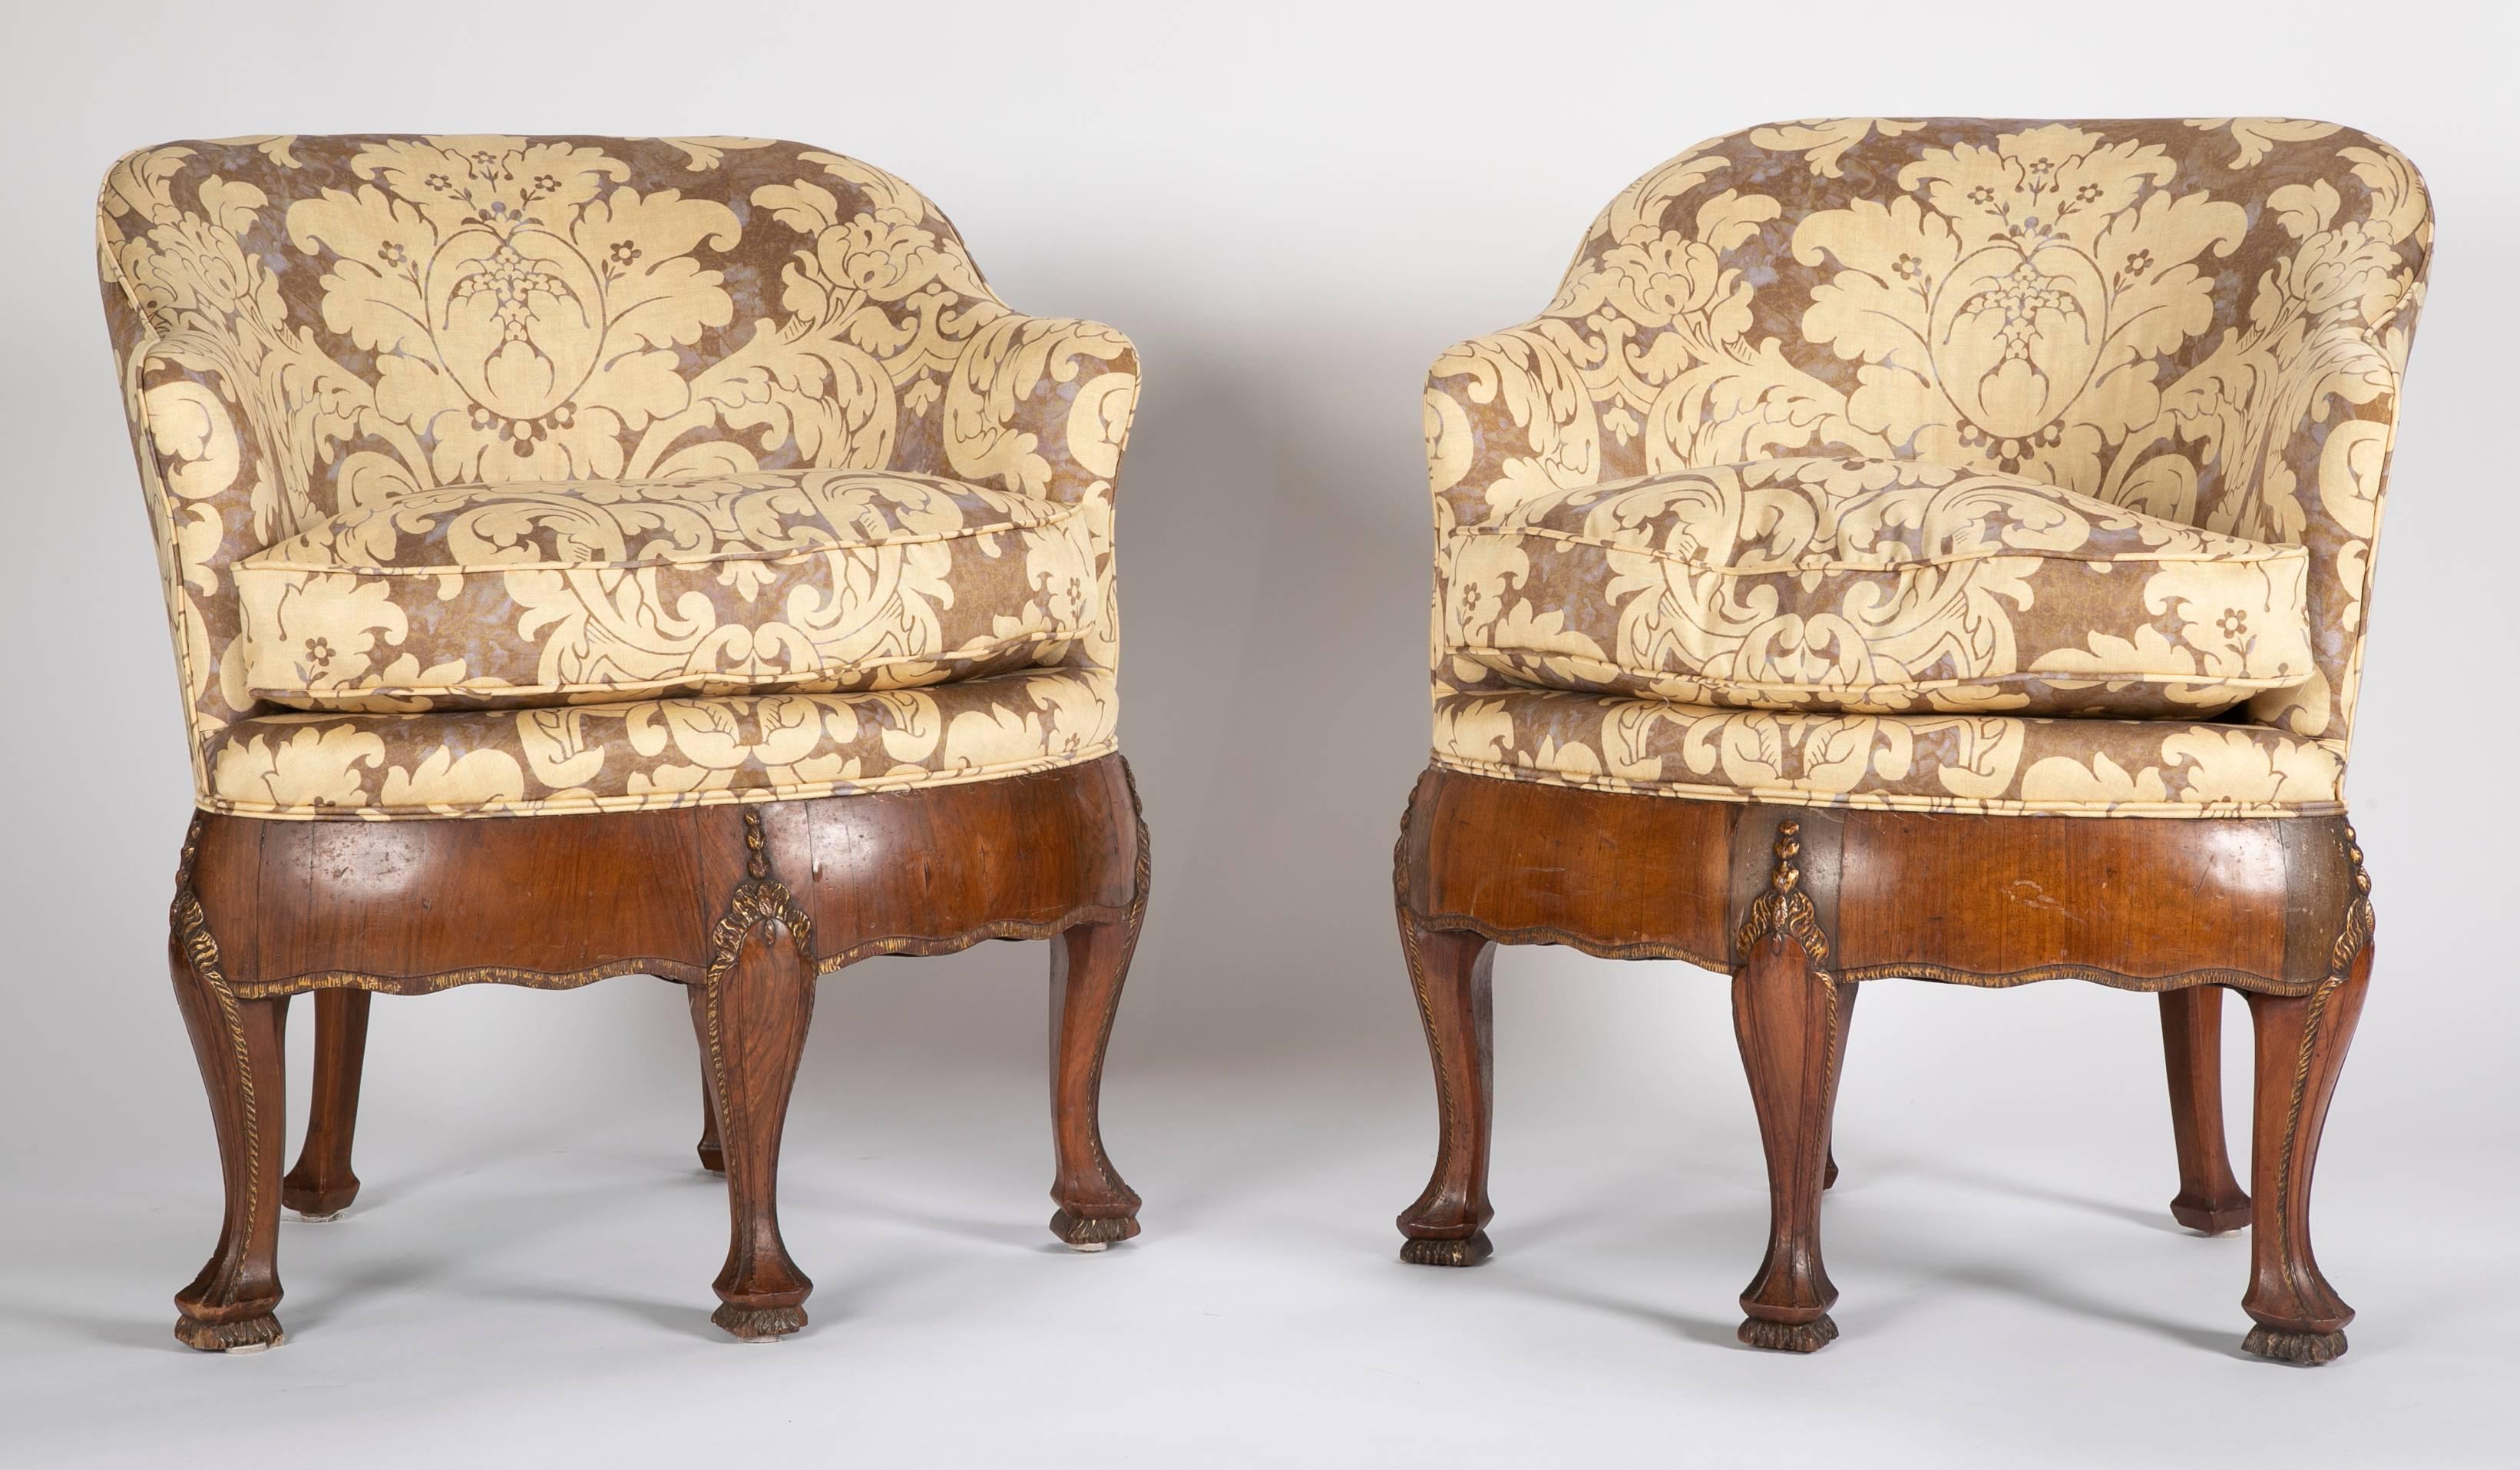 Unusual pair of late 19th century petite armchairs. Possibly Portuguese.